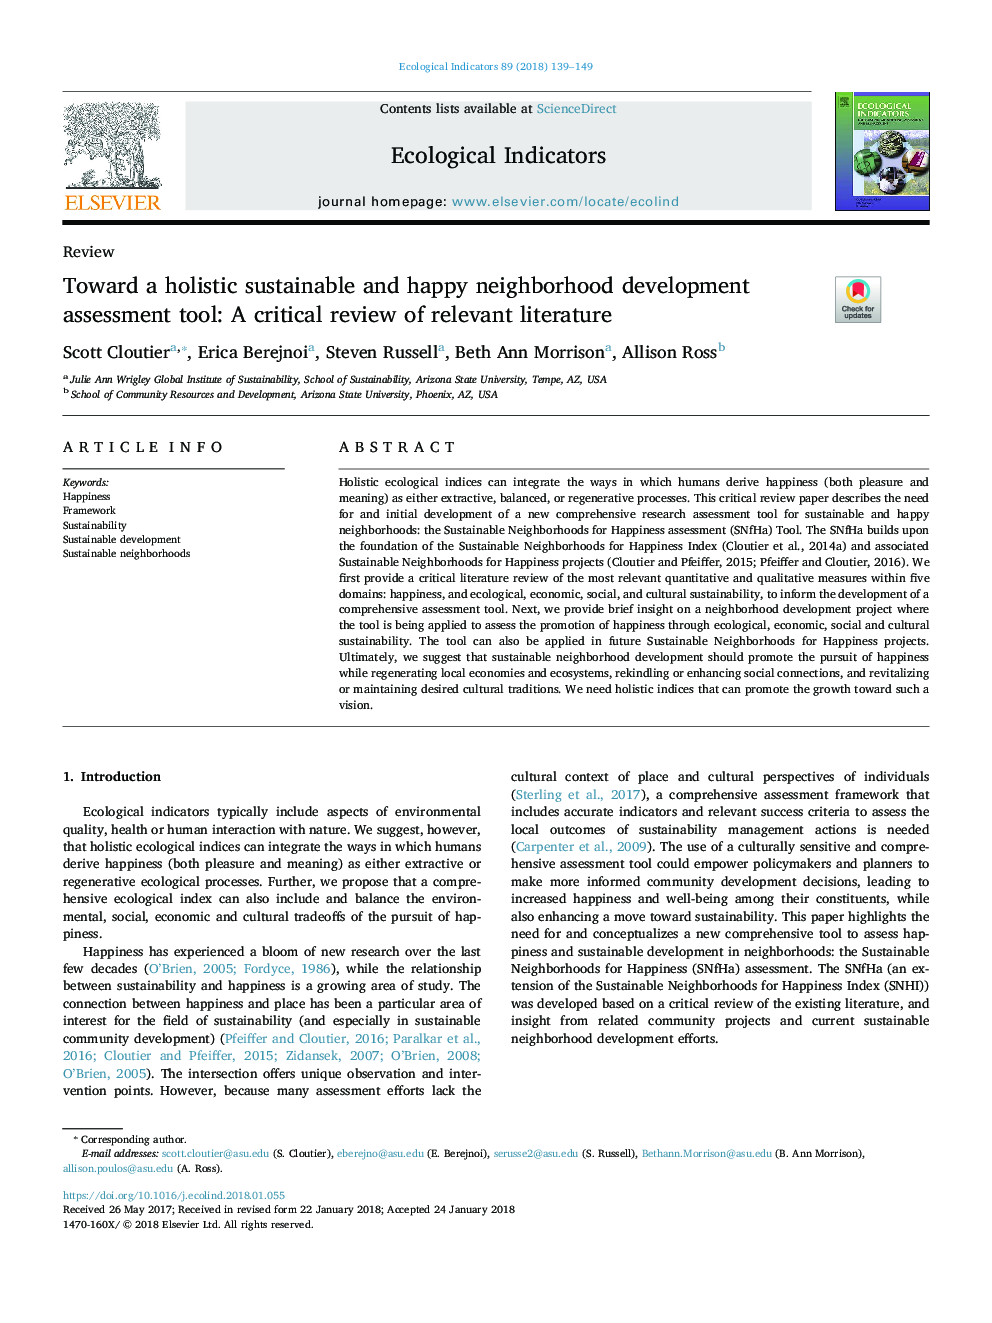 Toward a holistic sustainable and happy neighborhood development assessment tool: A critical review of relevant literature